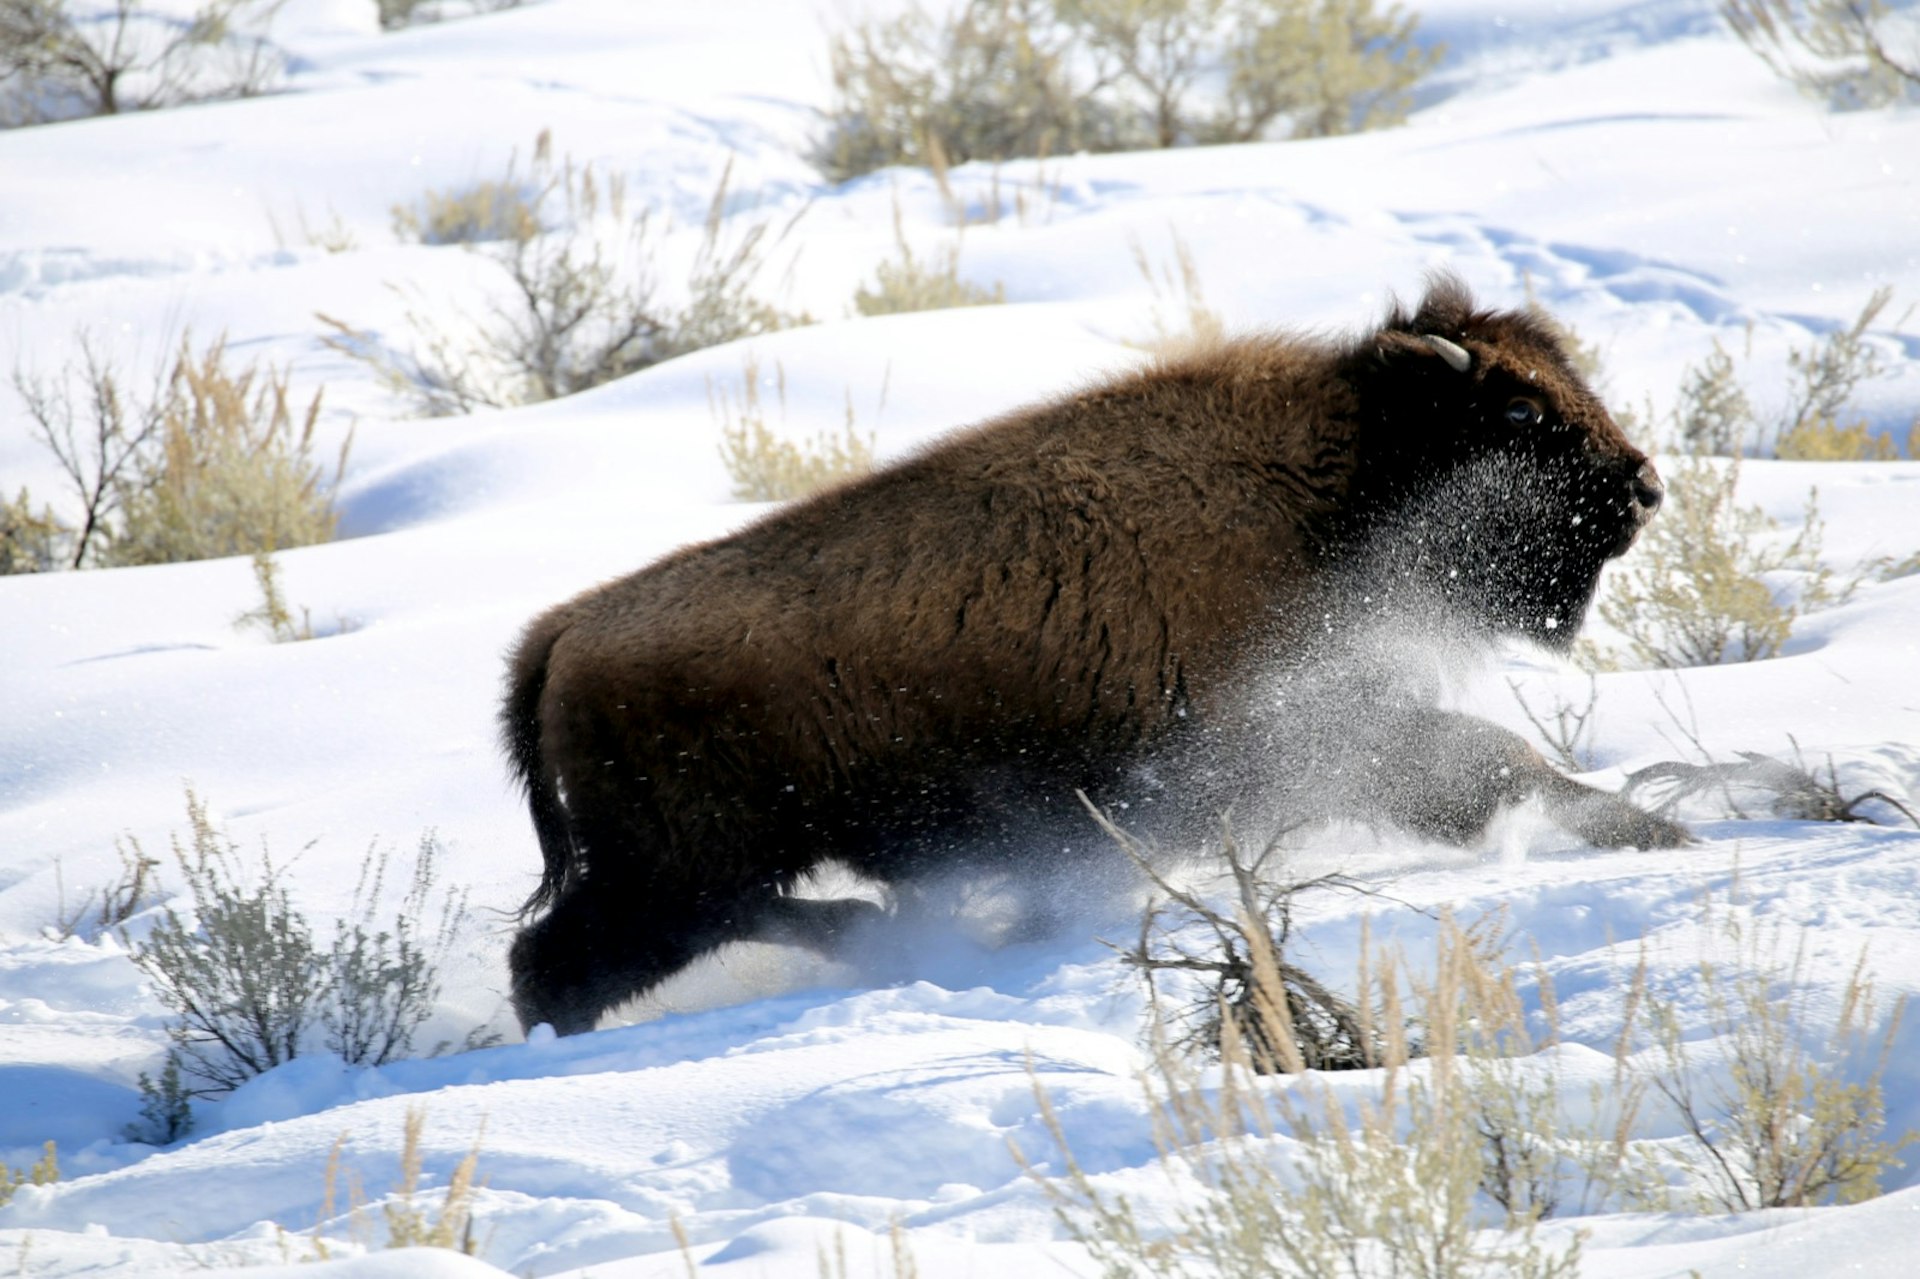 A baby bison kicks up a spray of snow as it climbs a hill; Yellowstone winter wildlife